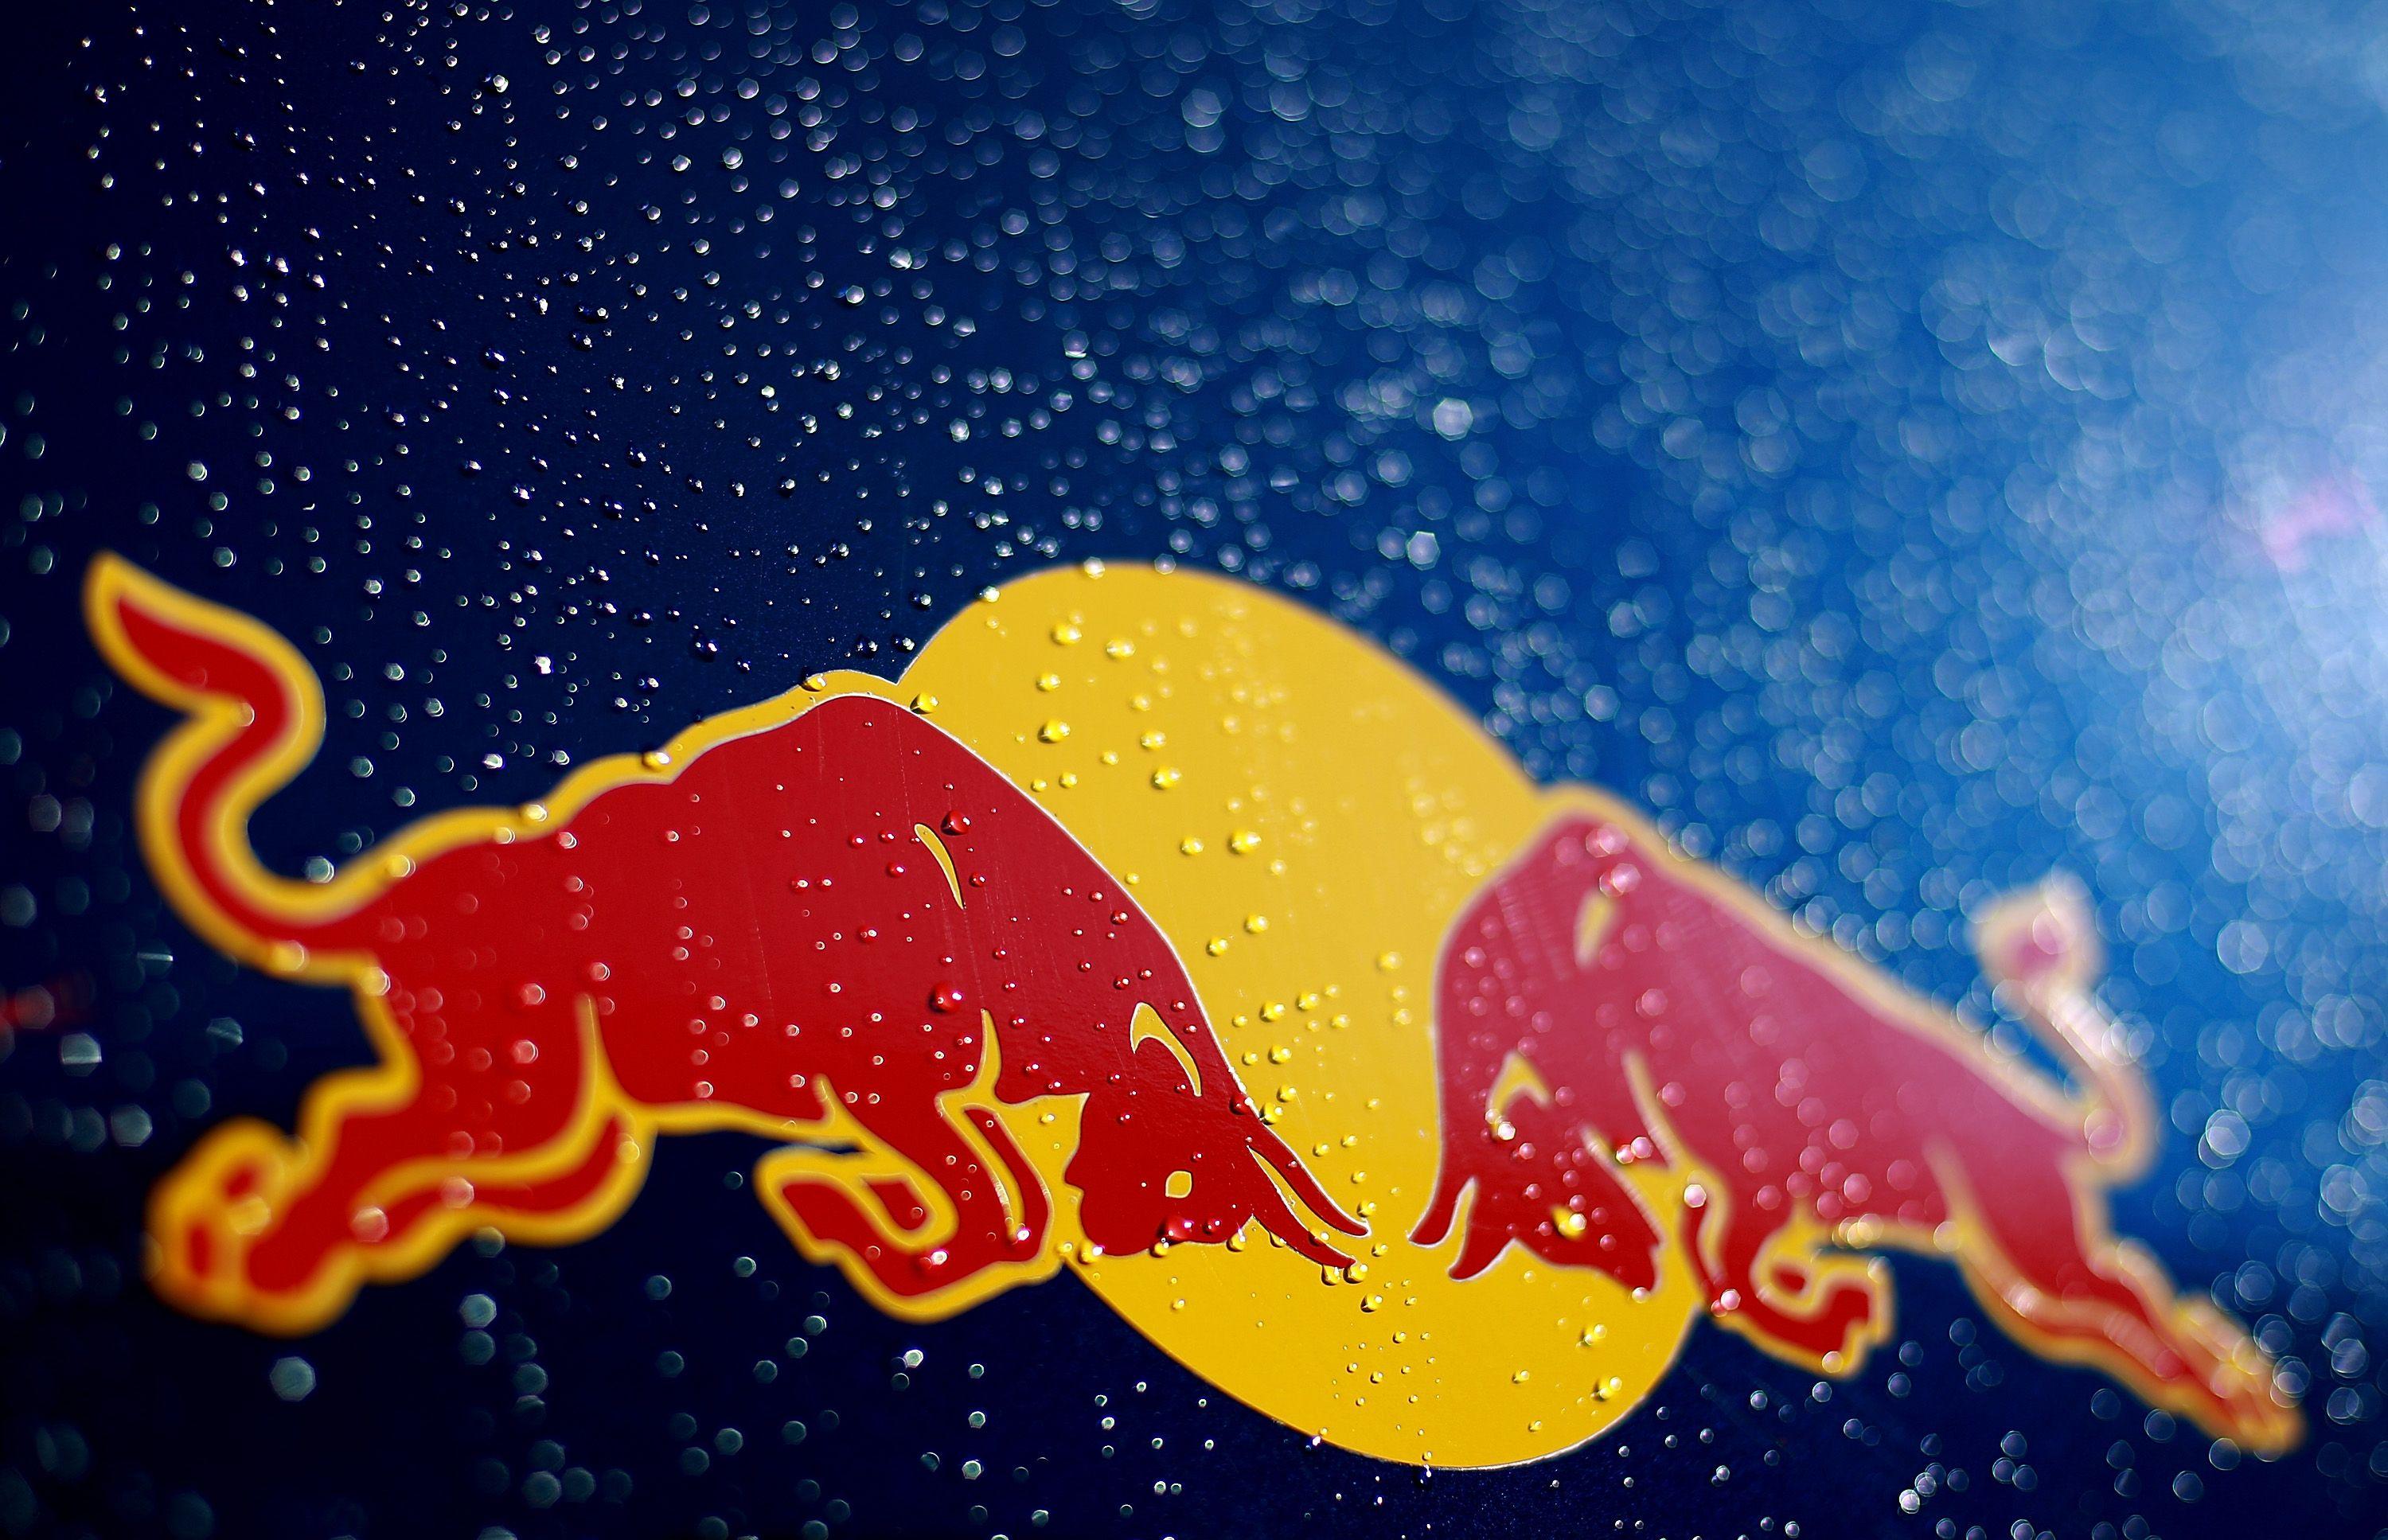 Cool Red and Blue Logo - MotoGP: Red Bull Logo to appear on Honda Machines in 2015 and 2016 ...